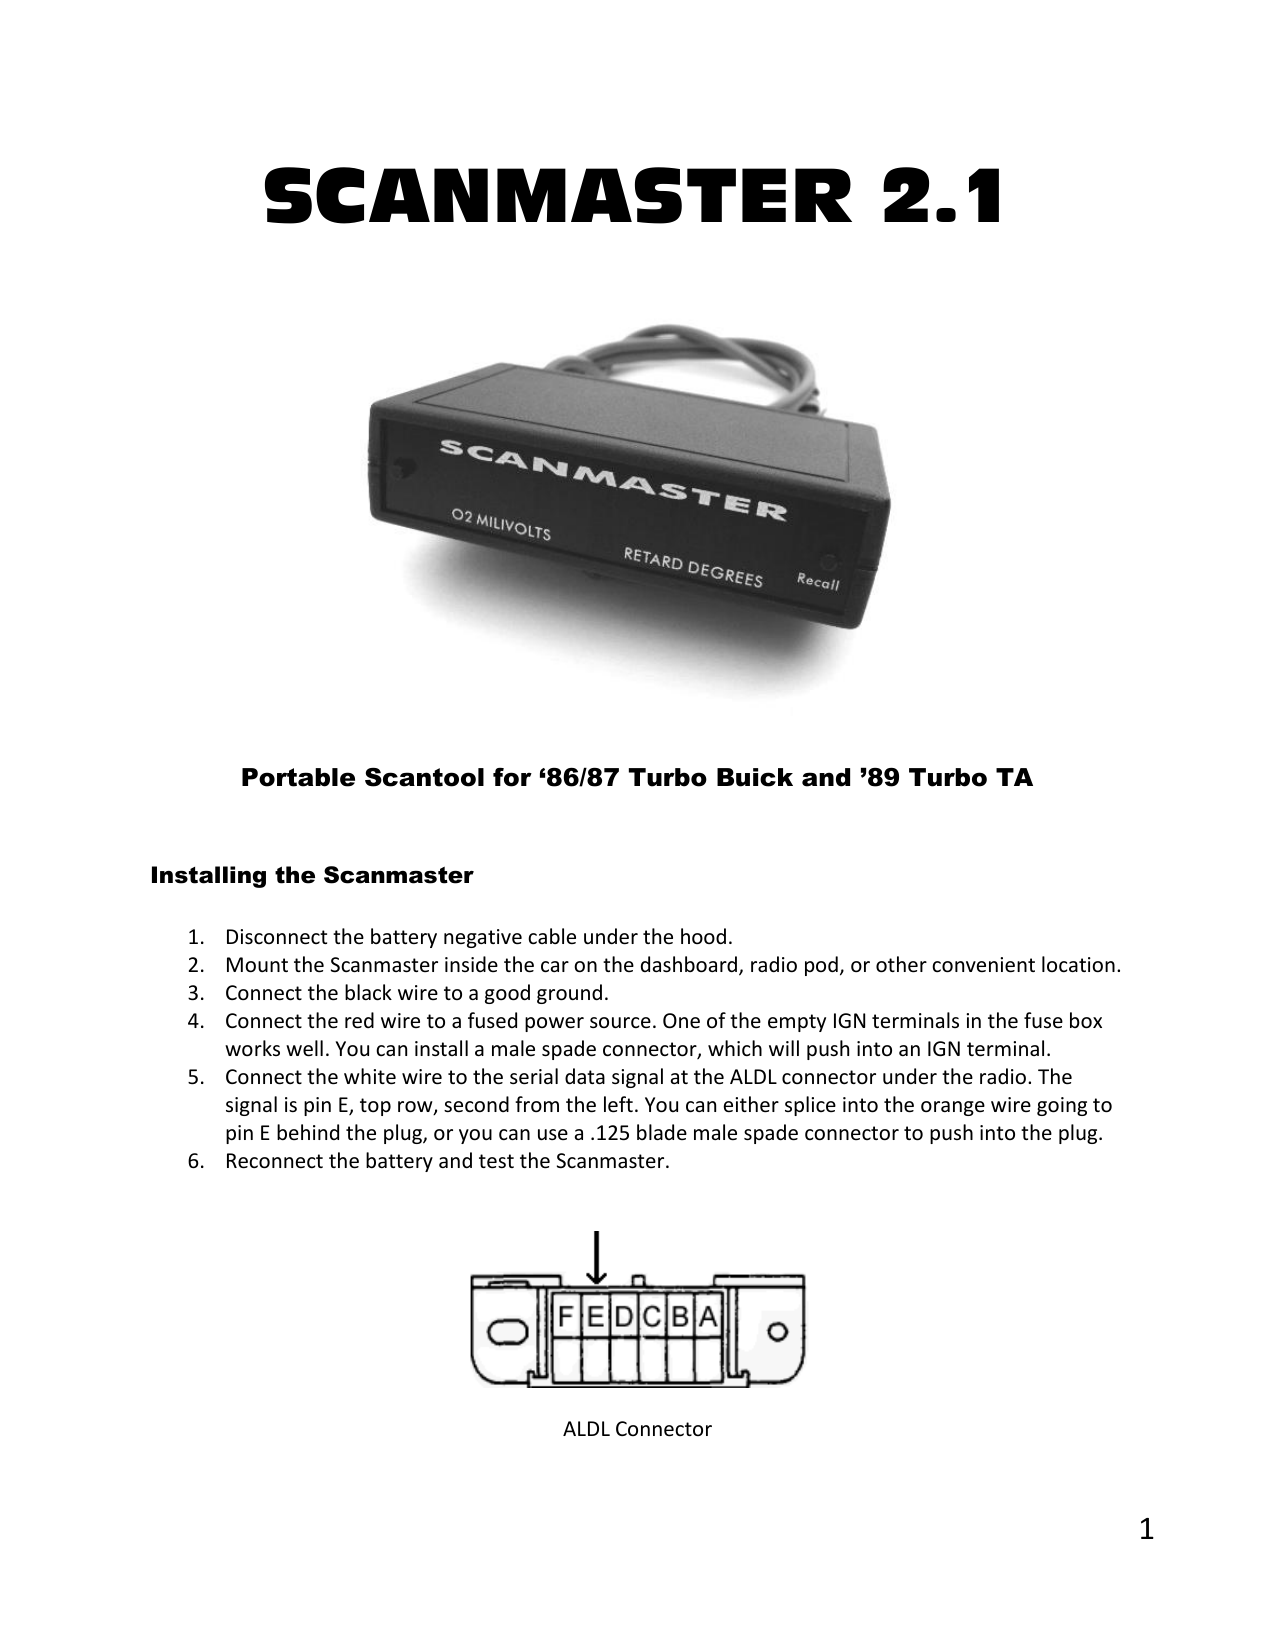 scanmaster 2.1 instructions